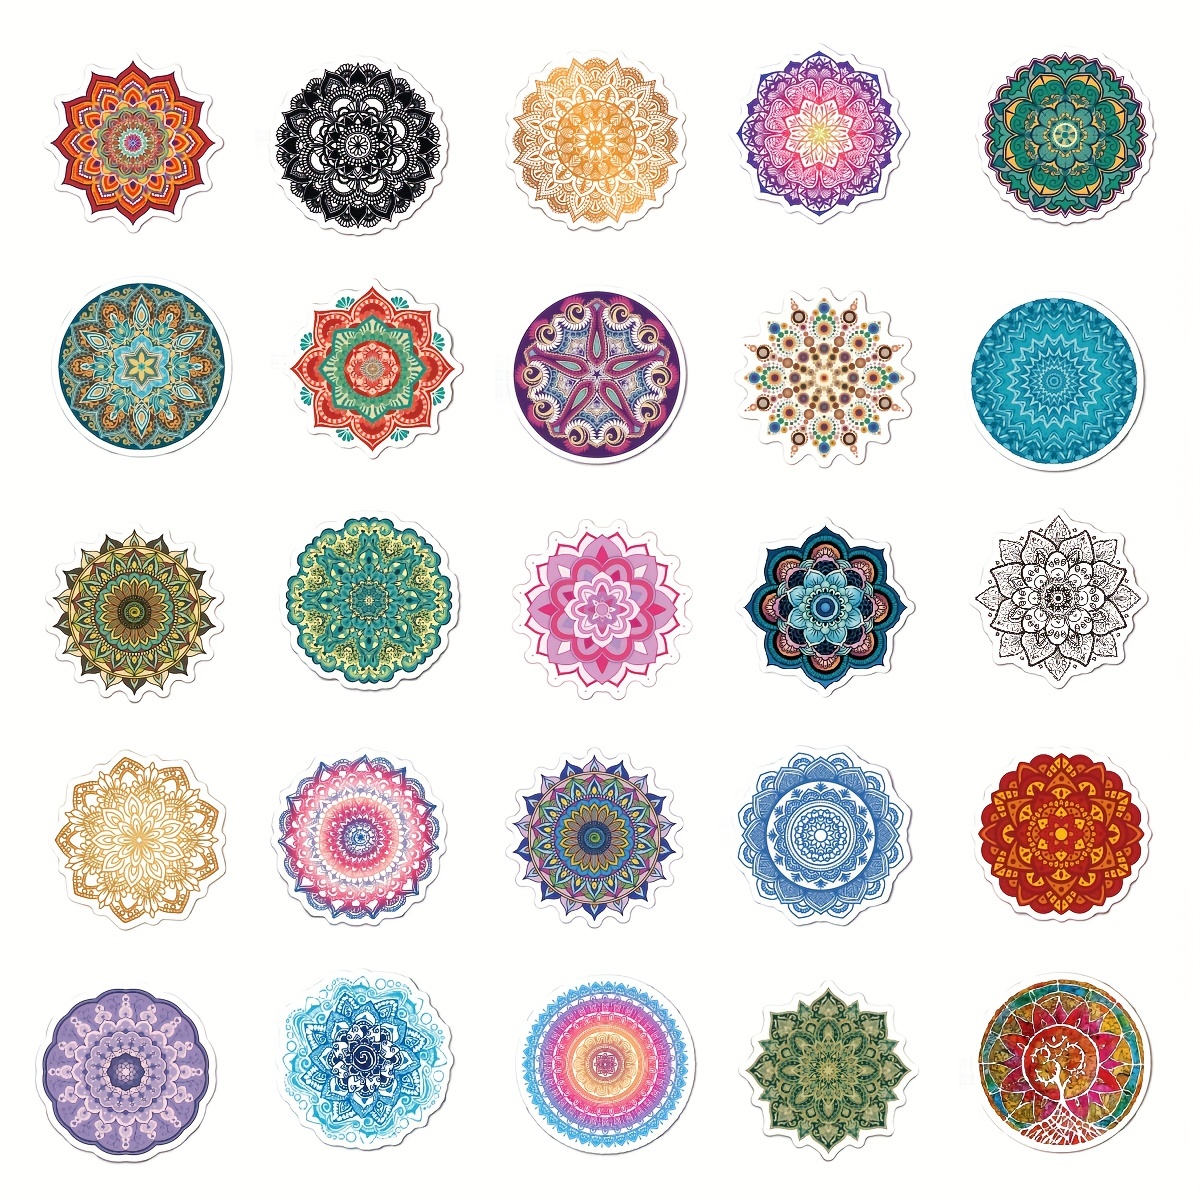  Yoga Stickers  50 Pcs Vinyl Waterproof Yoga Chakra Stickers  for Laptop, Water Bottles, Phone, Skateboard, Book - Spiriitual Stickers,  Mandala Yoga Stickers and Decals Gifts for Adults, Teens, Kids : Electronics